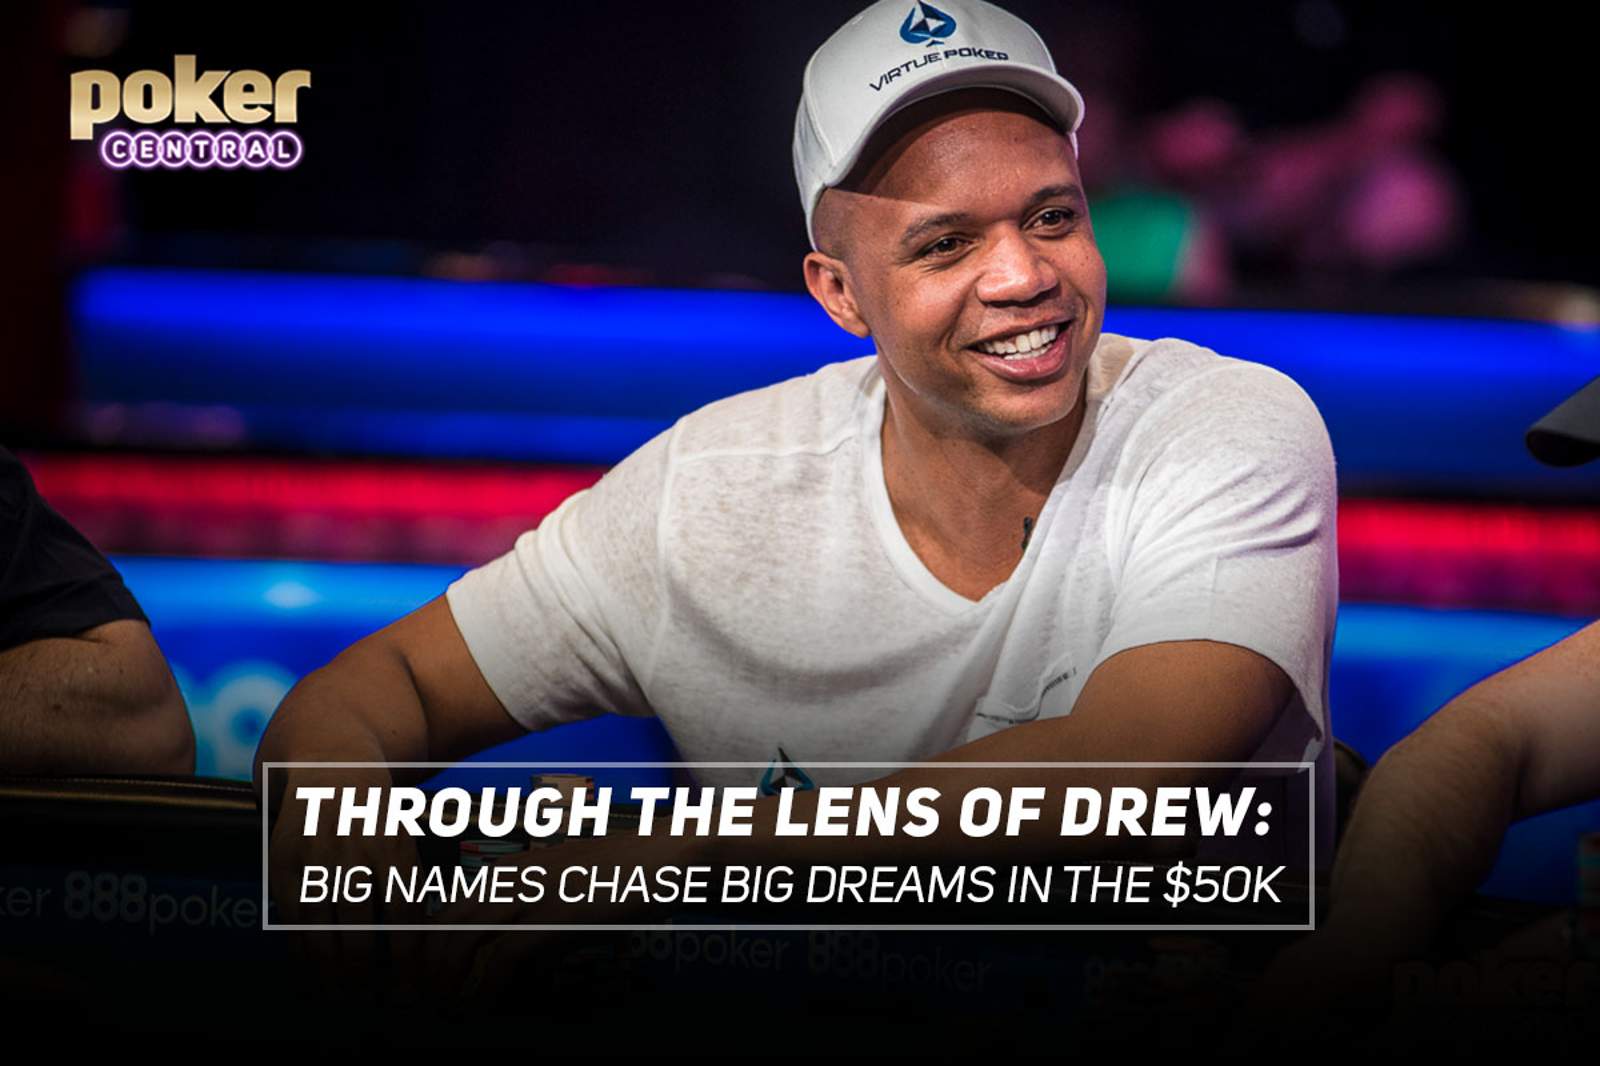 Through The Lens of Drew: Big Names Chase Big Dreams in the $50k